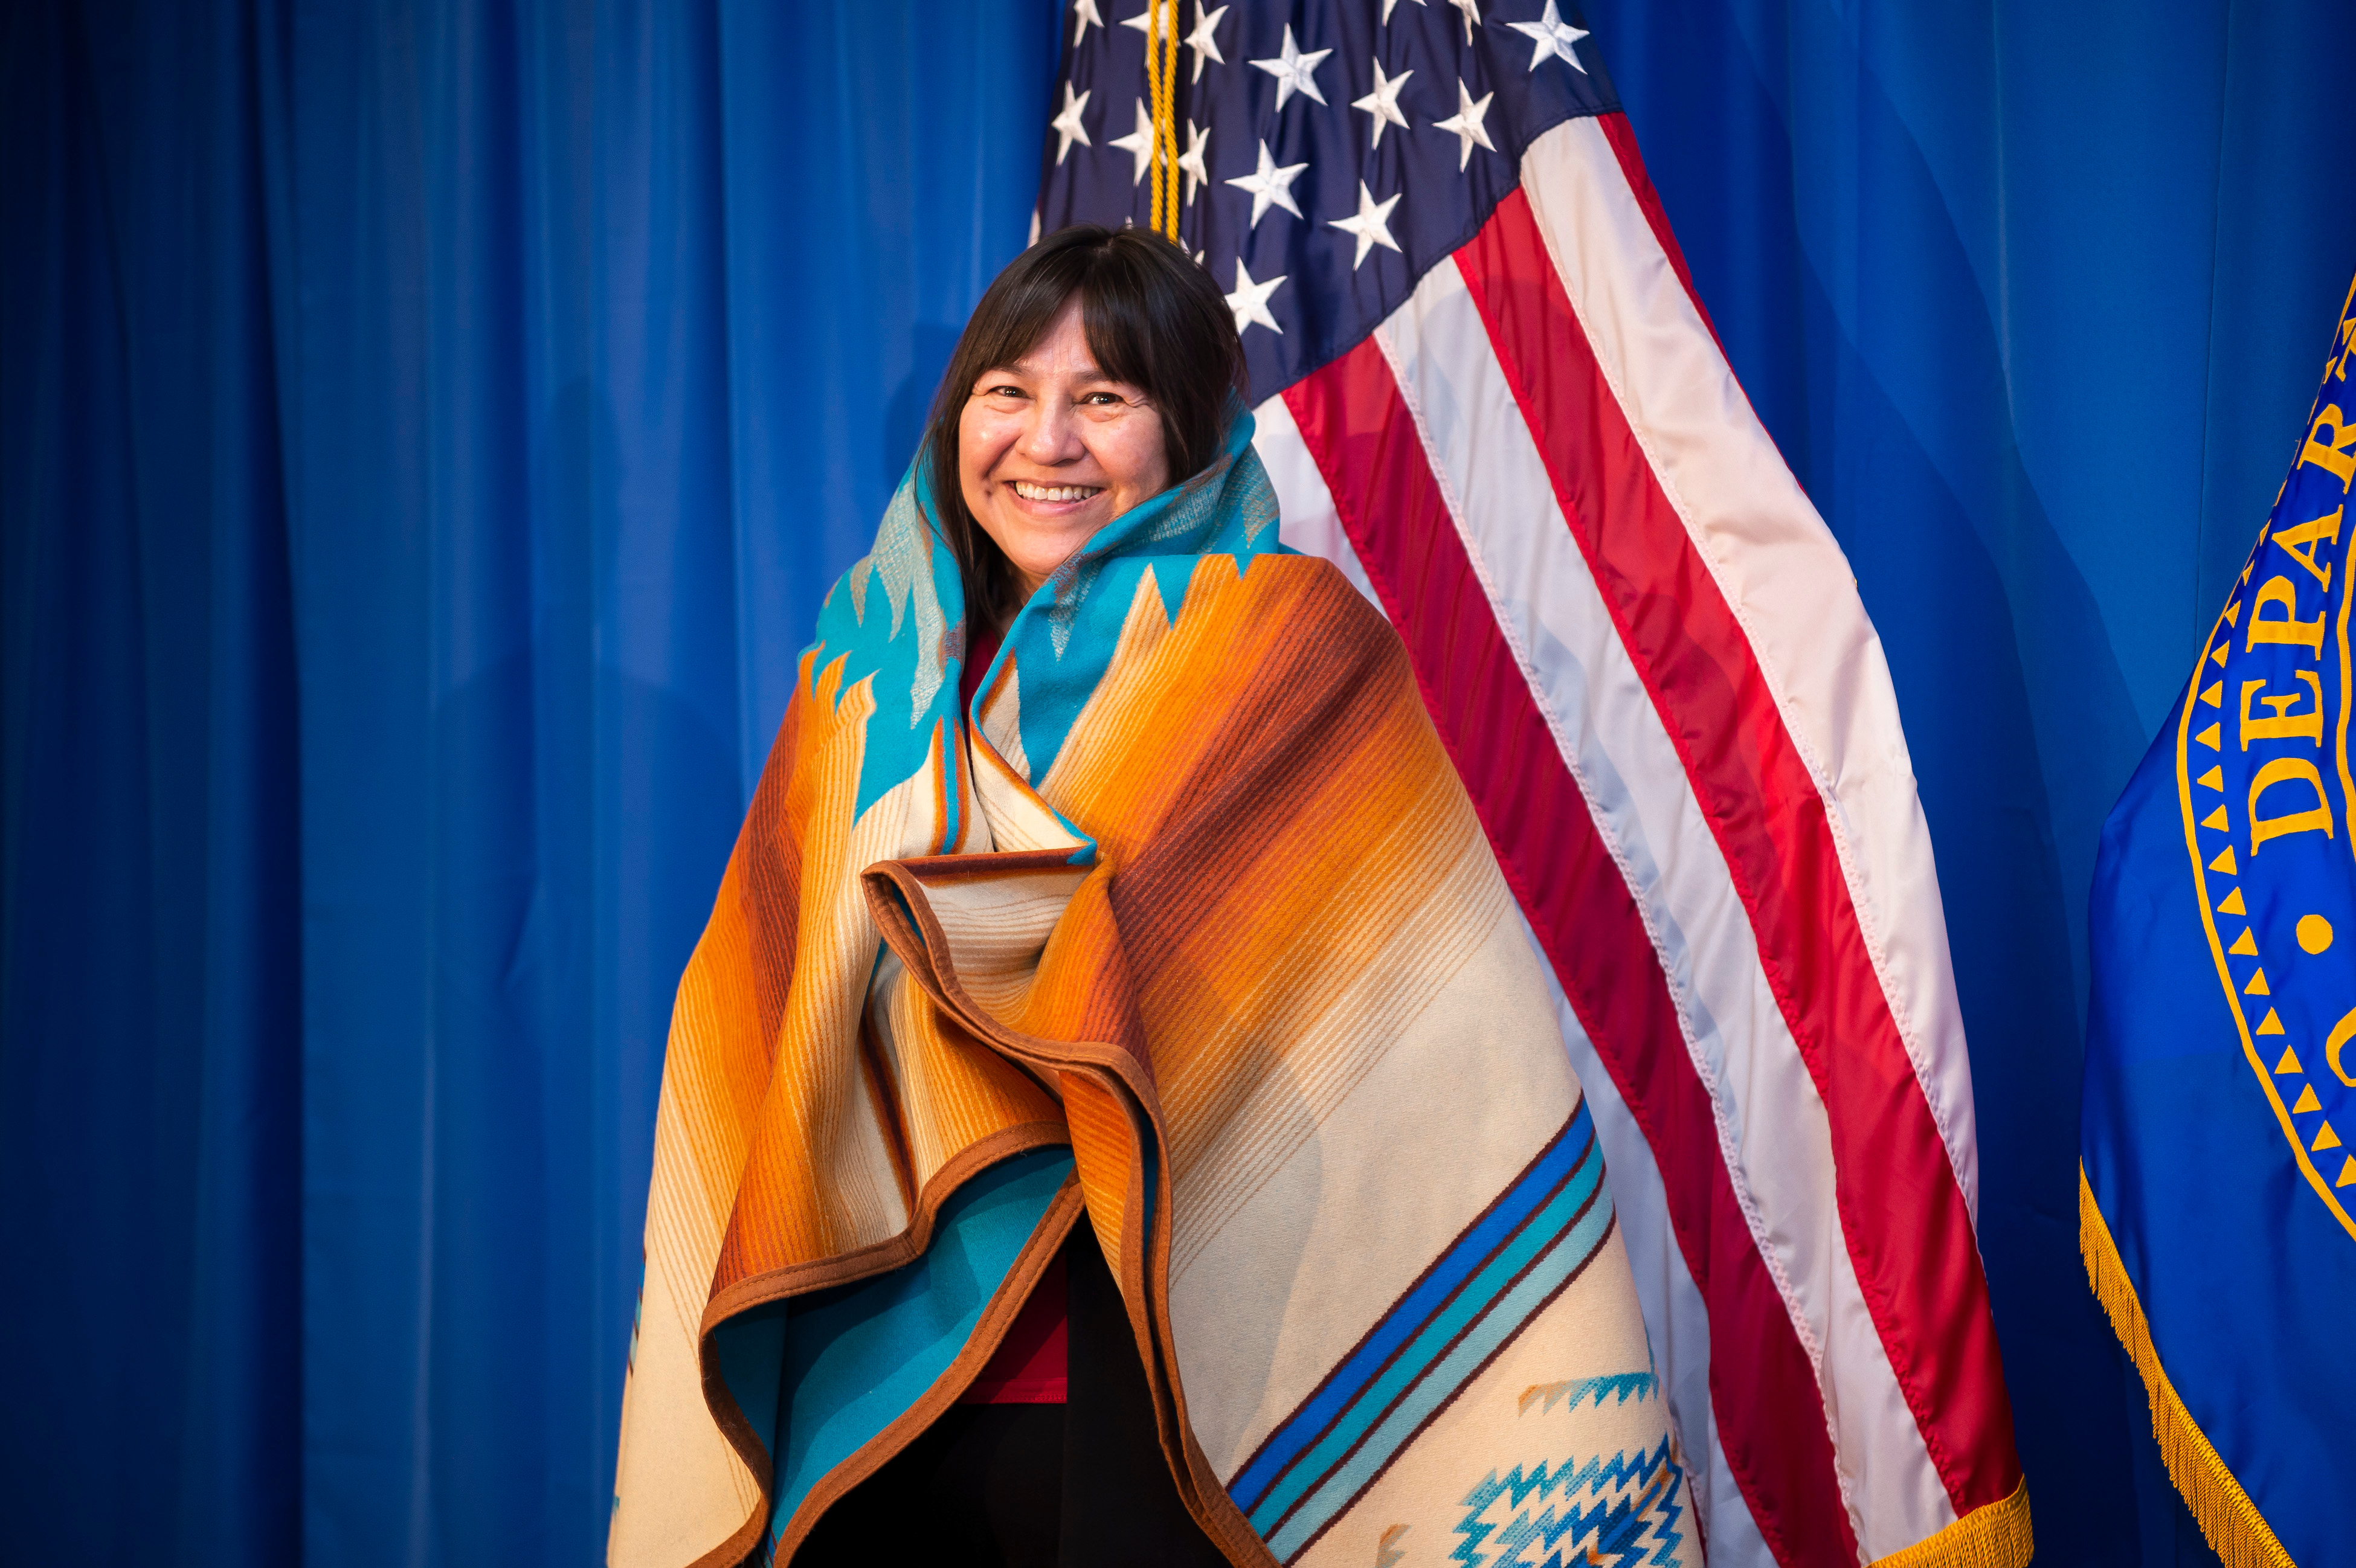 Special Recognition – Elizabeth Fowler - Wearing the Beautiful Blanket